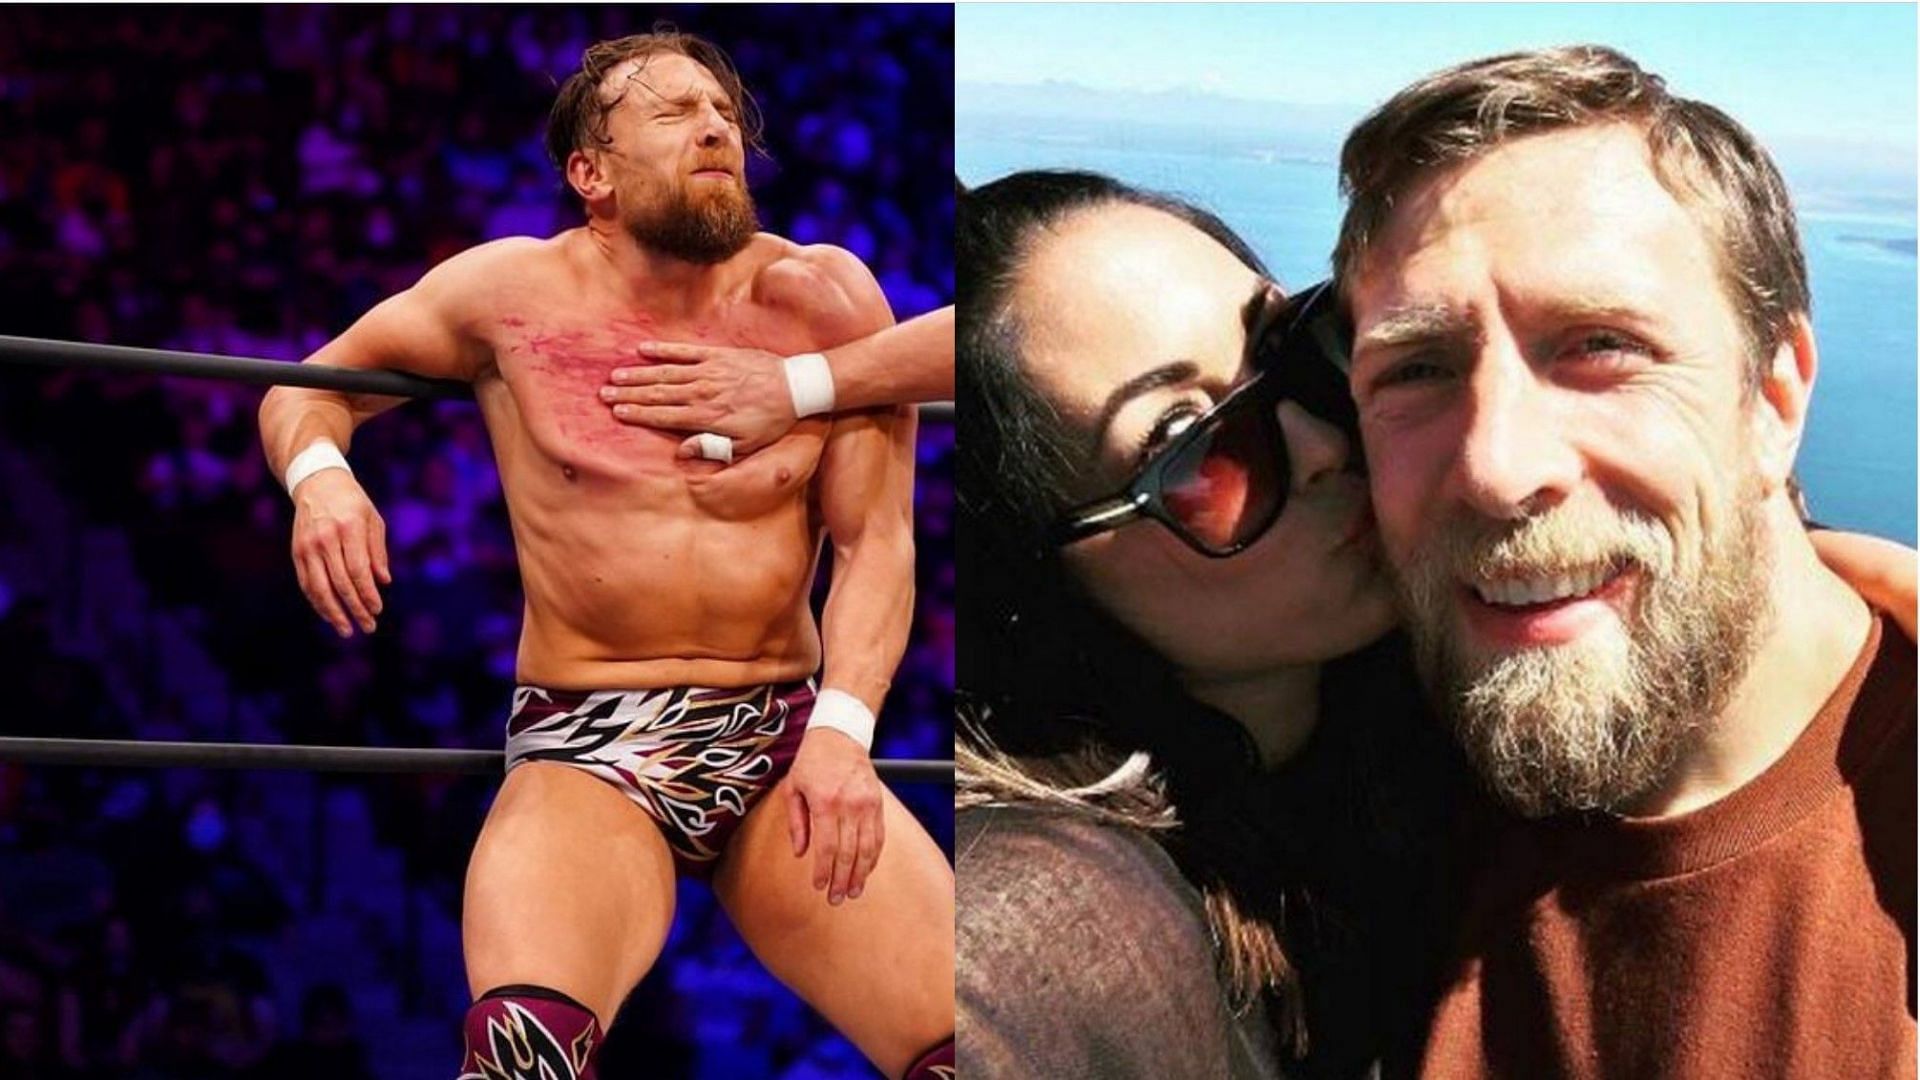 Bryan Danielson and Brie Bella are one of the power couples in pro wrestling today!